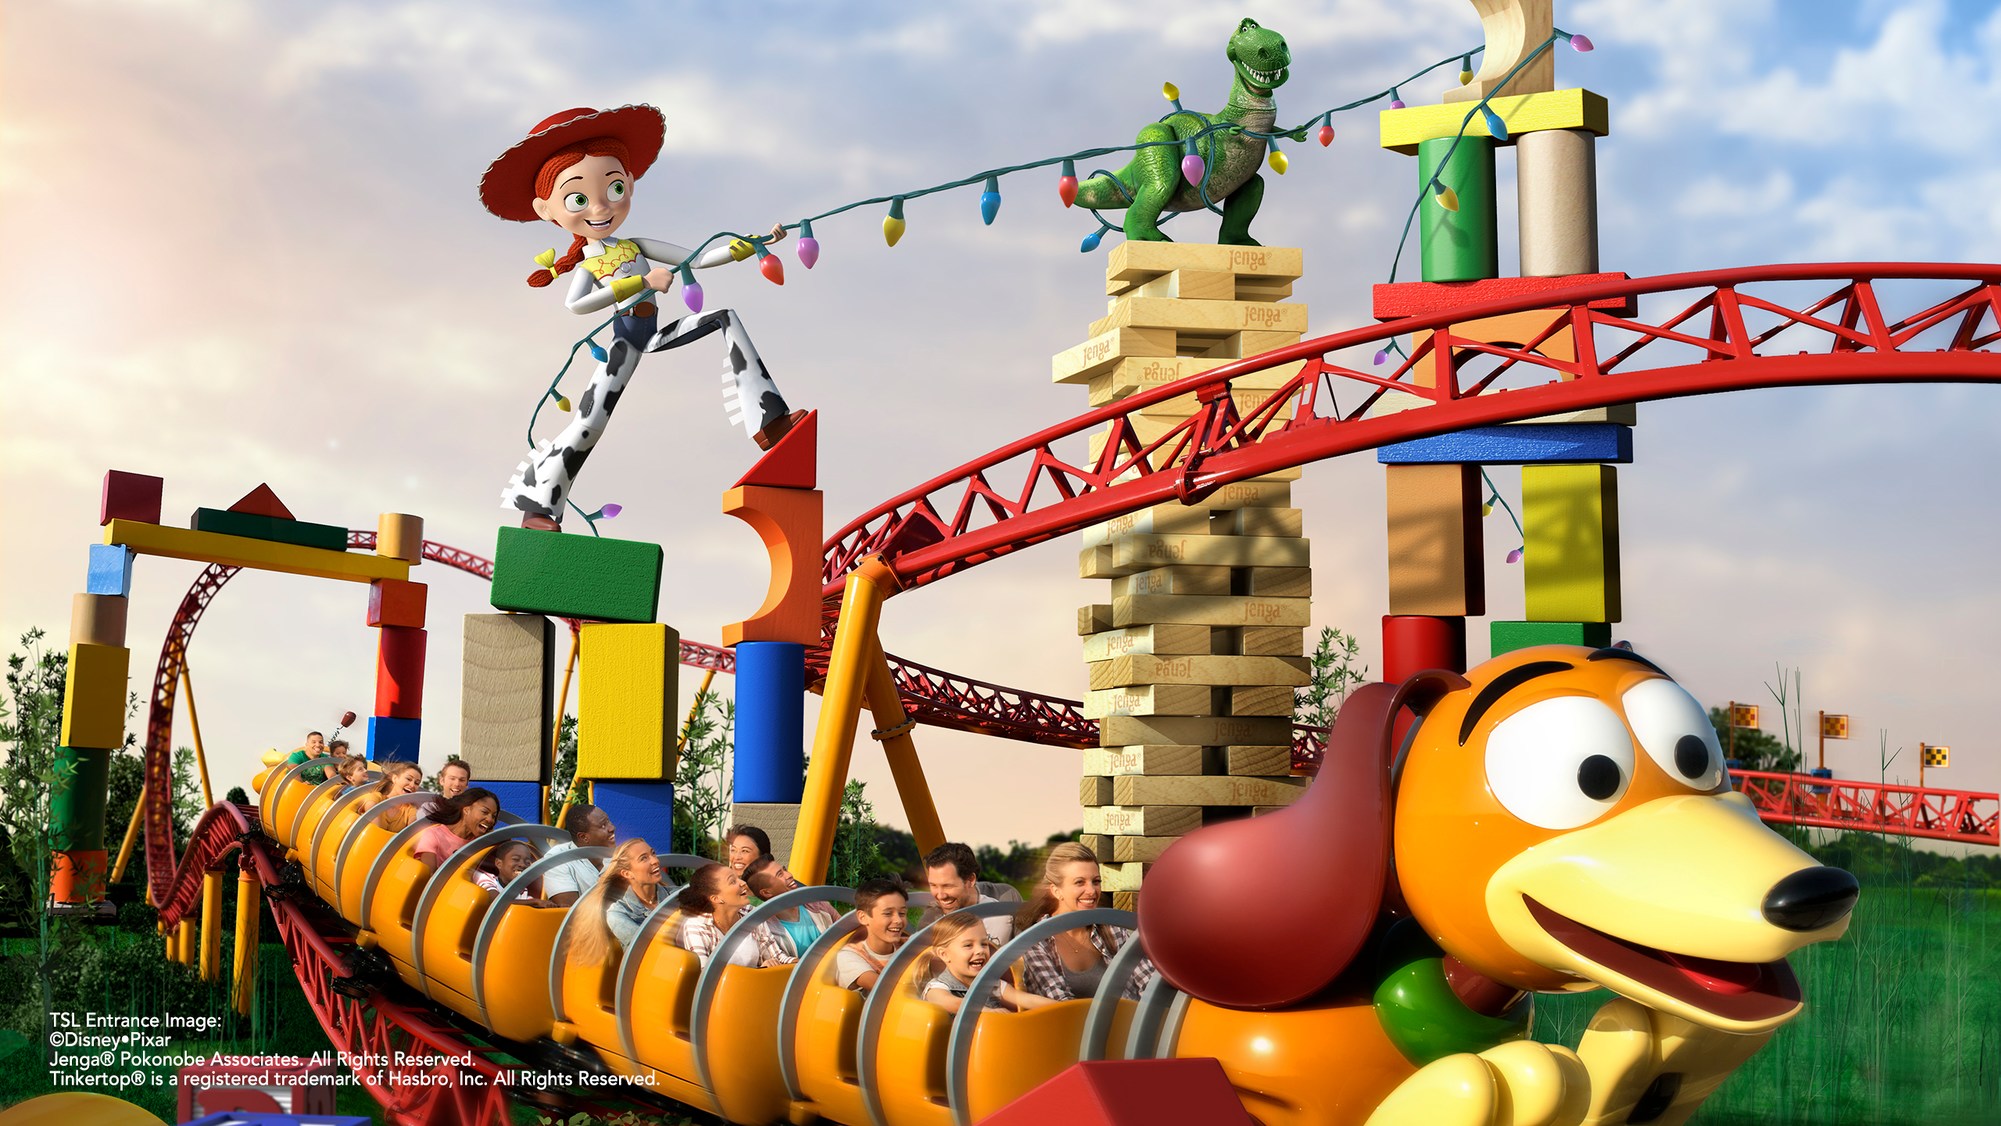 Slinky Dog Dash Roller Coaster to Feature On-Ride Photo - Blog Mickey